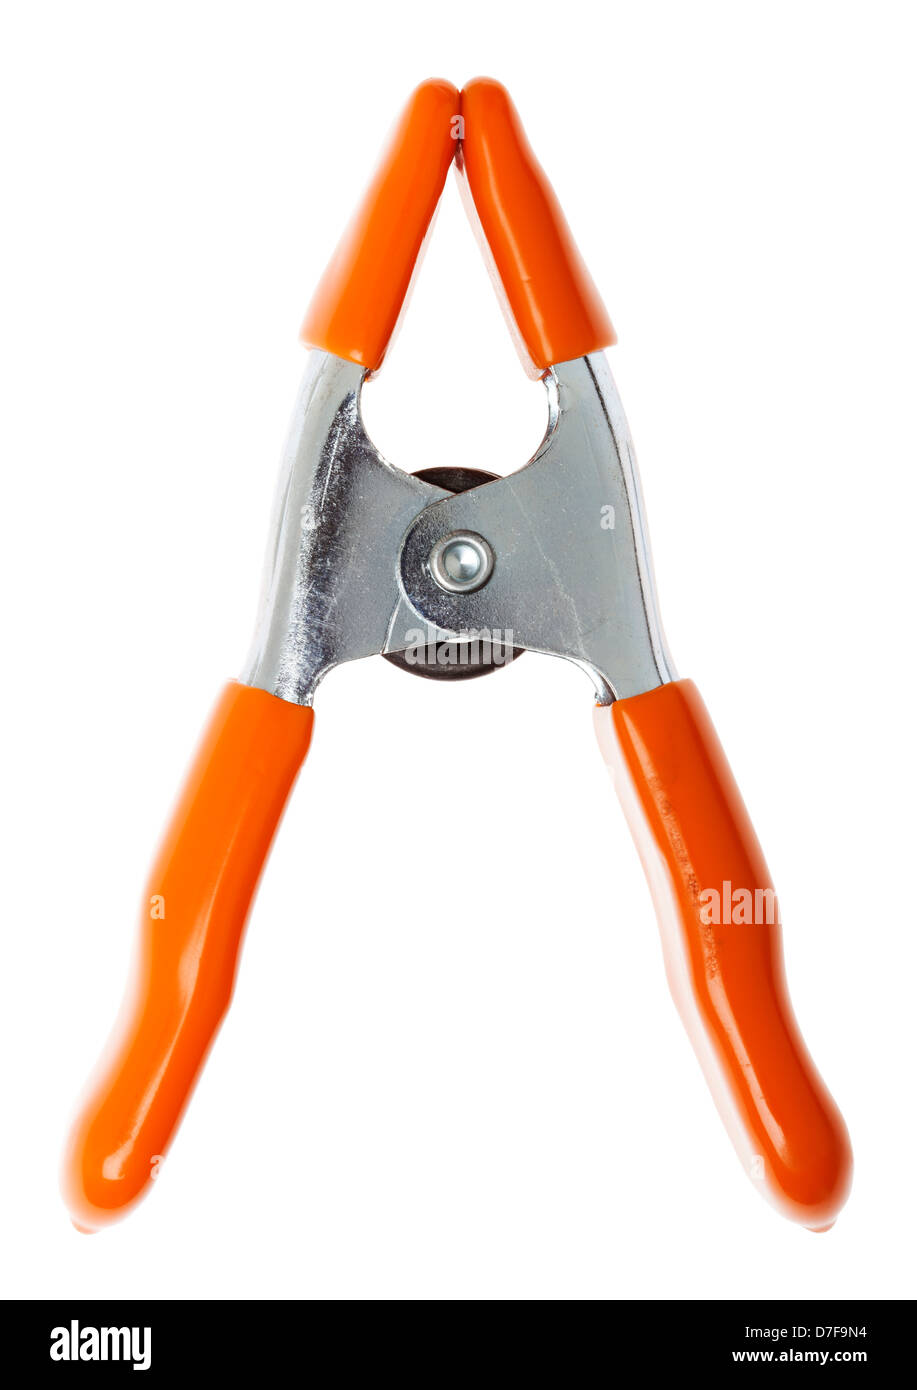 Silver colored metal 'A' clamp with orange plastic covers on its edges and handles. Isolatedon white background. Stock Photo